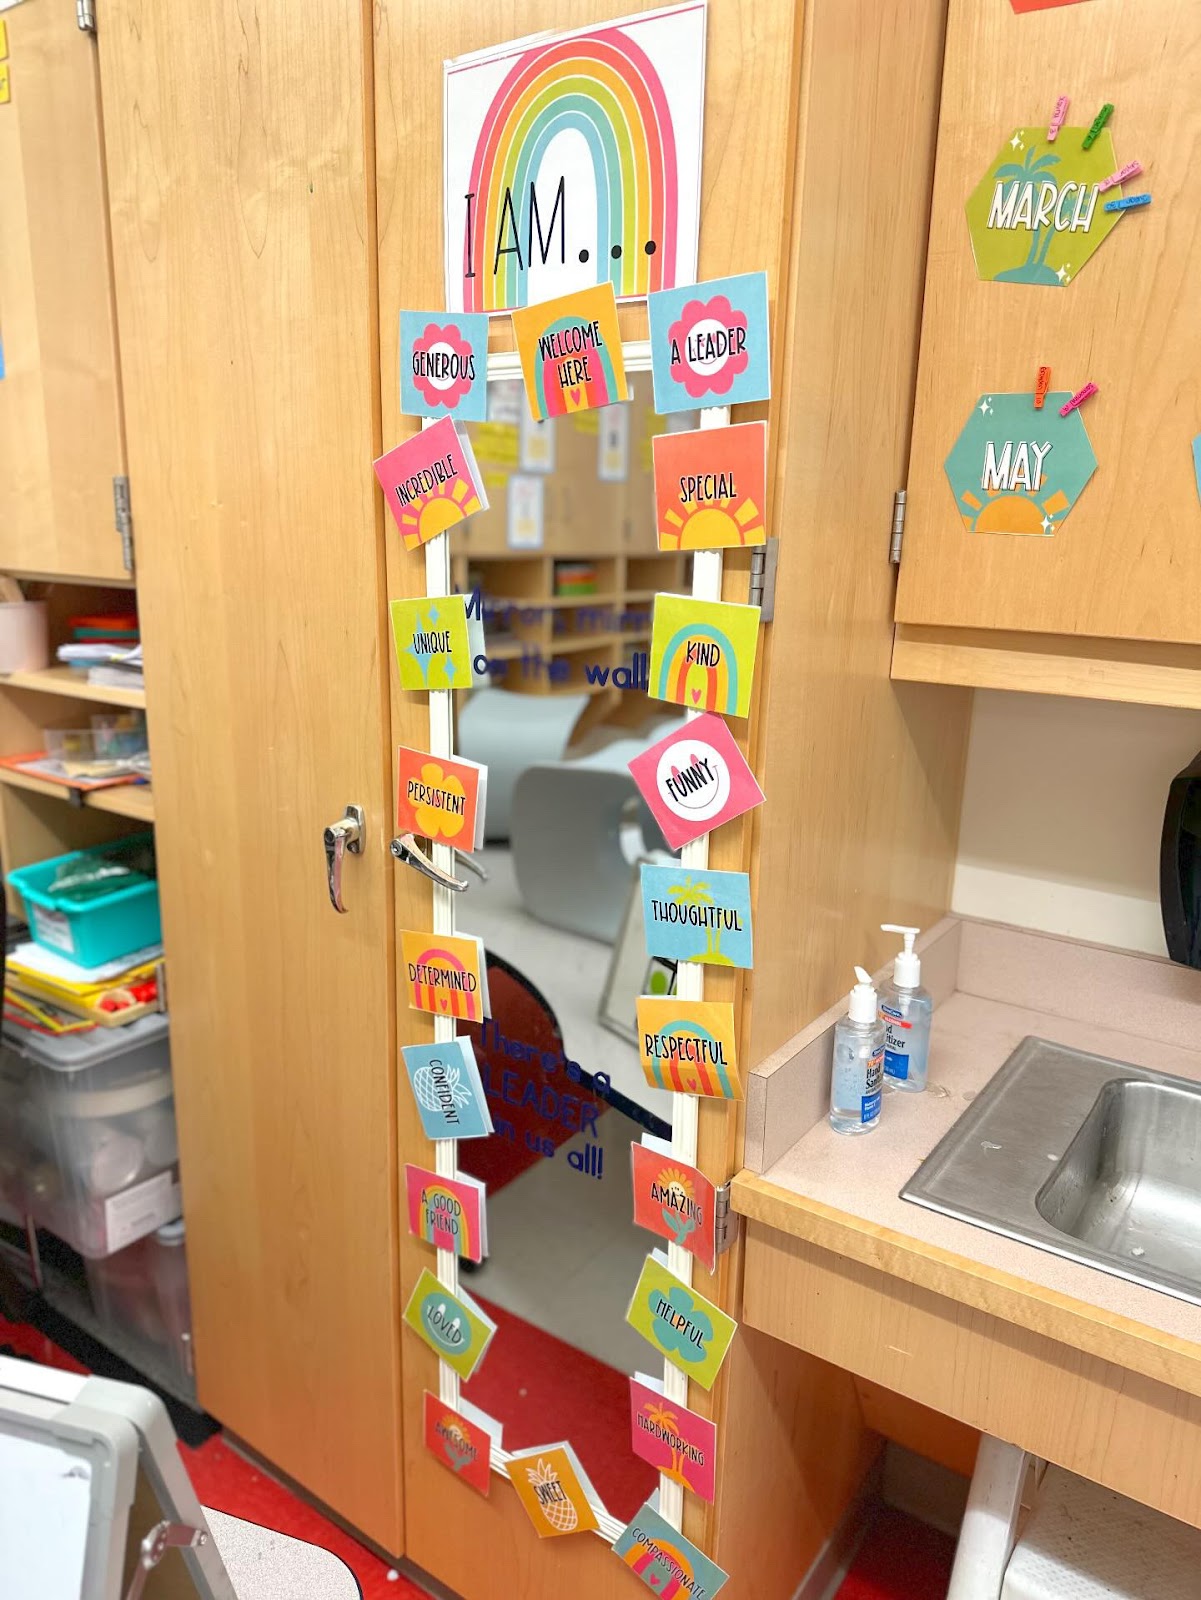 This image shows a closeup of an affirmation station. There is a long, skinny mirror attached to a long cabinet door with small cards taped all the way around the border of the mirror. The cards have different affirmations written on them. 